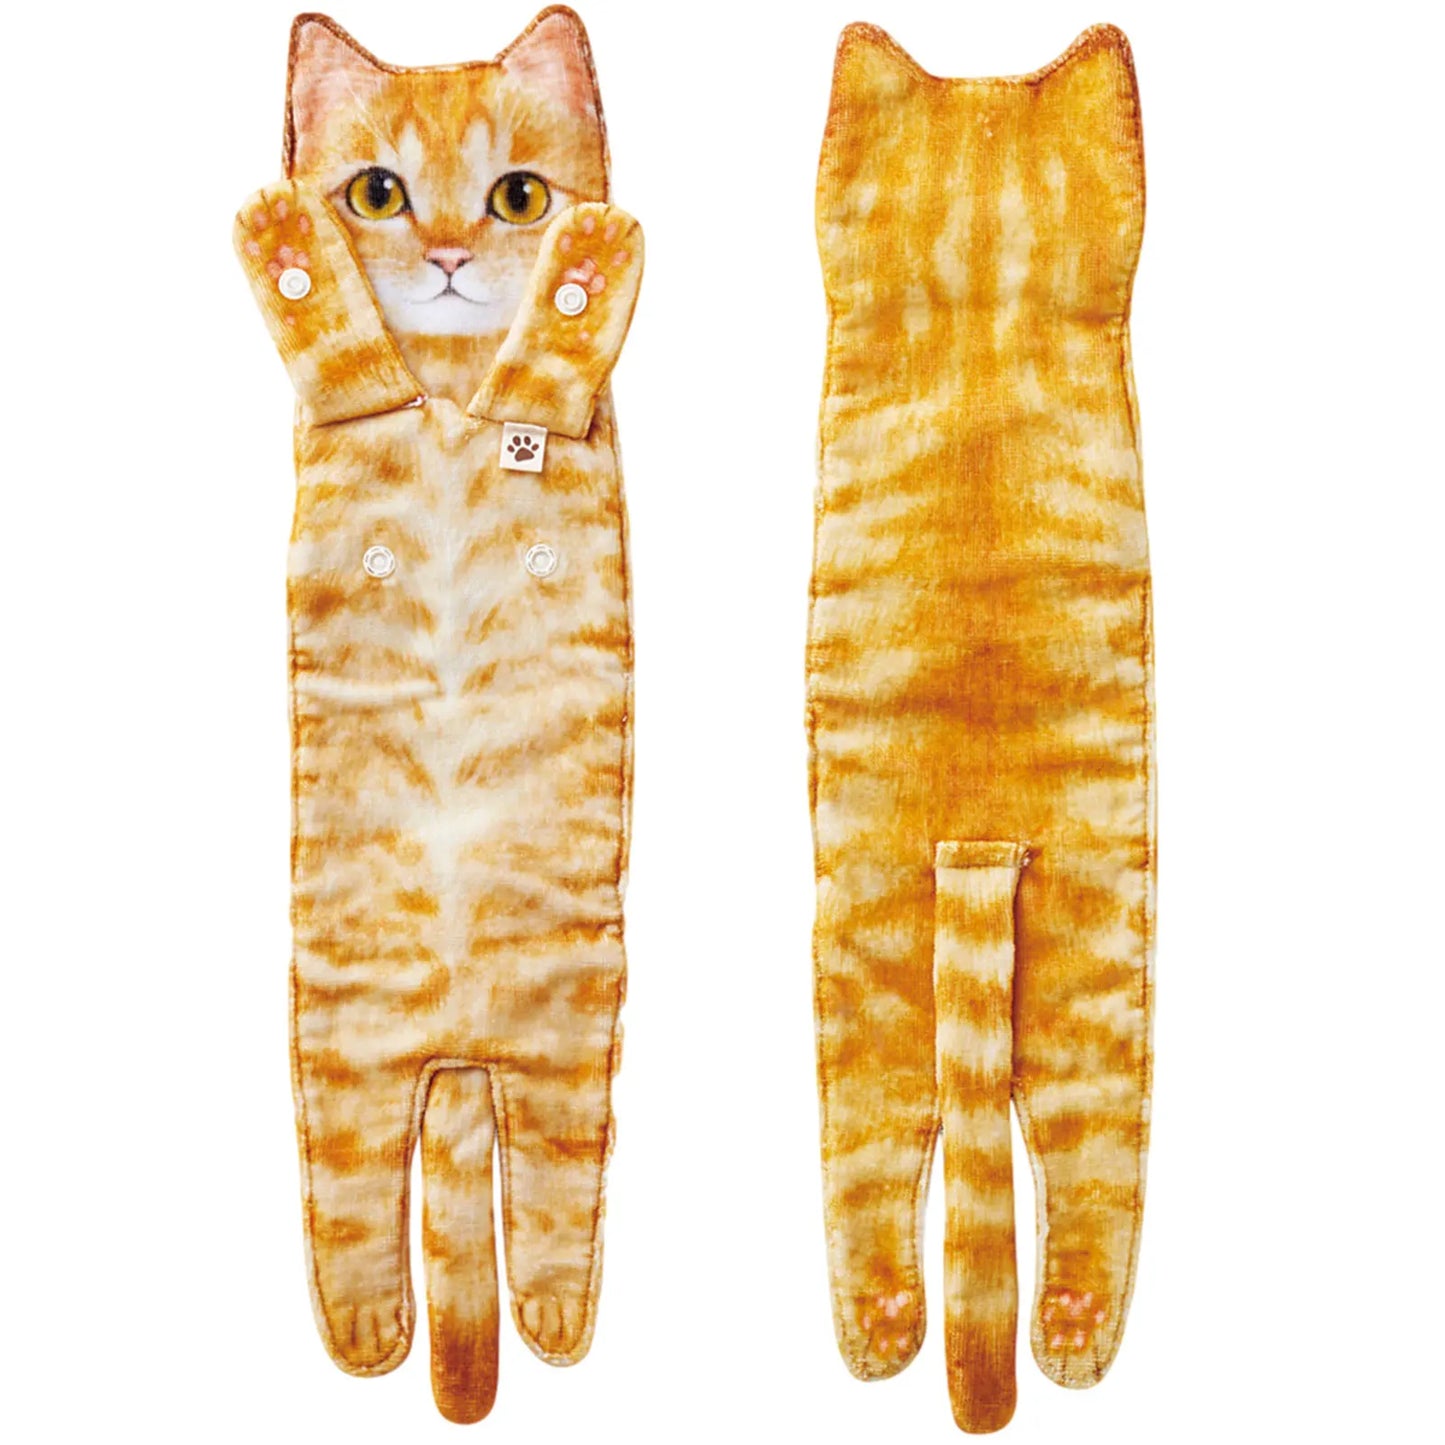 Creative and Humorous Cat-Themed Hand Towels: Soft, Absorbent, and Perfect for Your Kitchen or Bathroom - Nekoby Creative and Humorous Cat-Themed Hand Towels: Soft, Absorbent, and Perfect for Your Kitchen or Bathroom orange cat||14 / CHINA||200007763